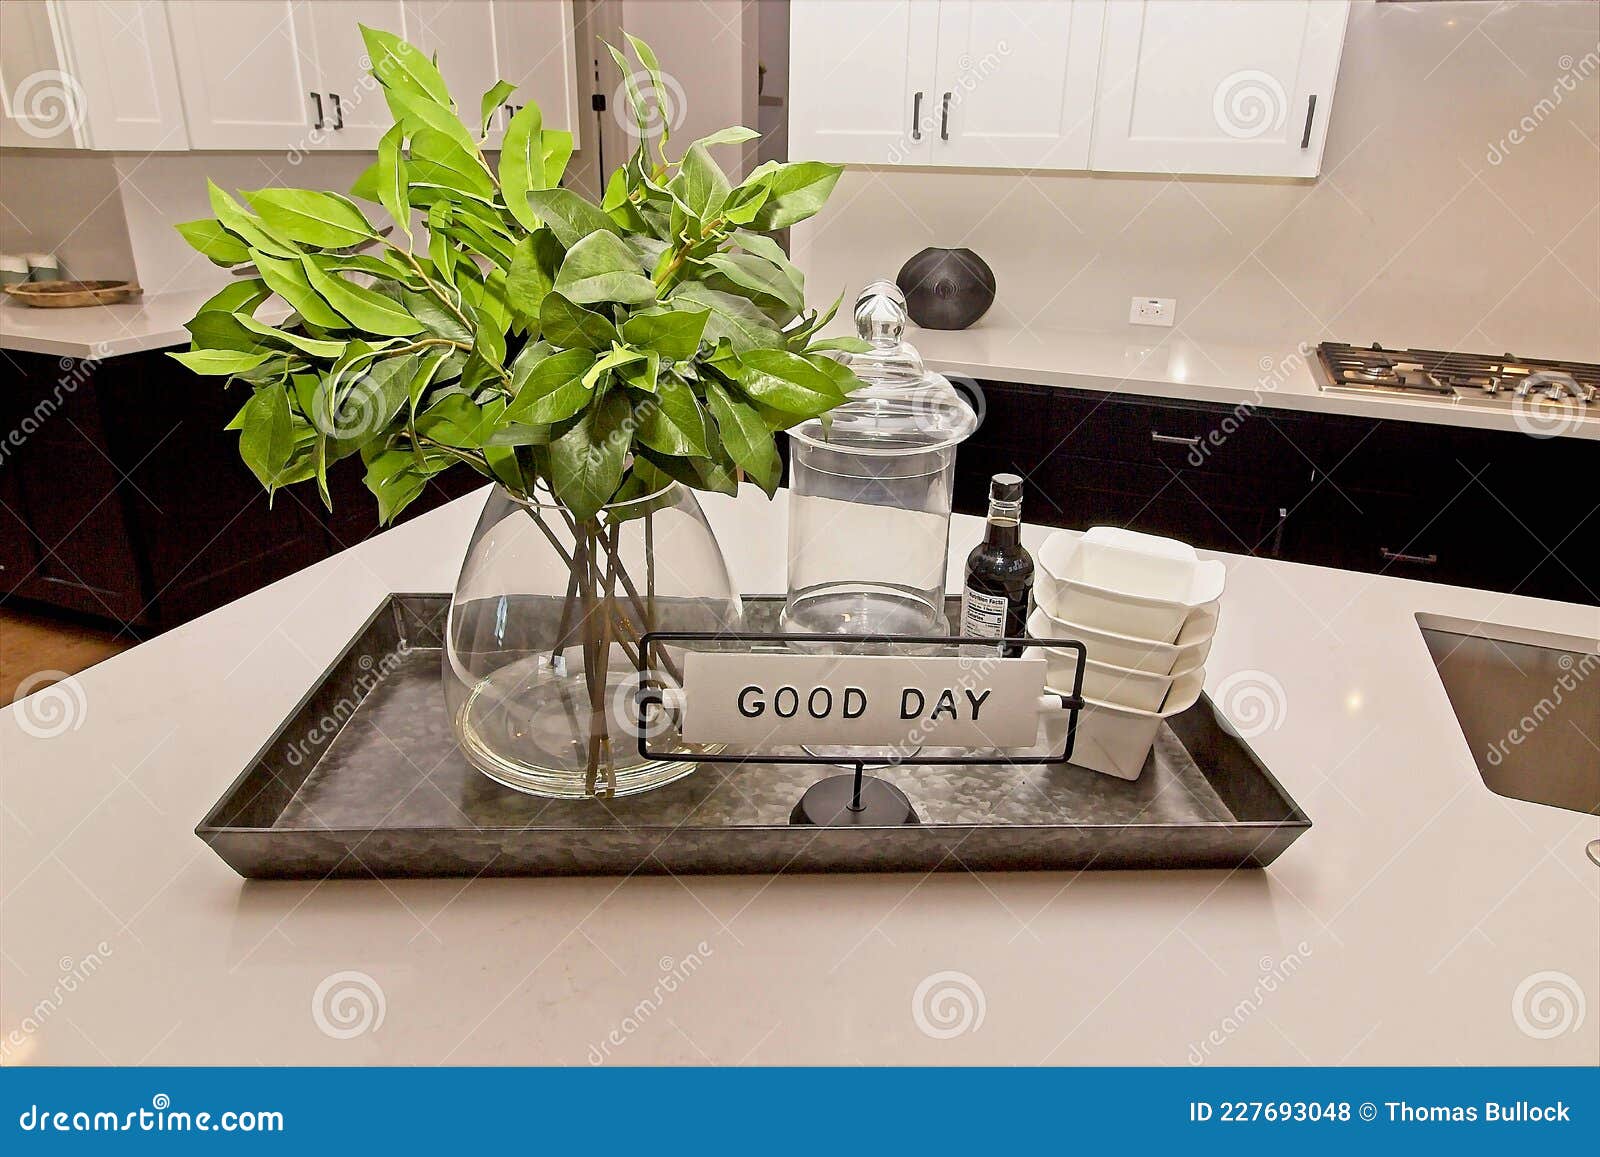 Kitchen Island with Metal Tray of Flowers, Containers and Bowls